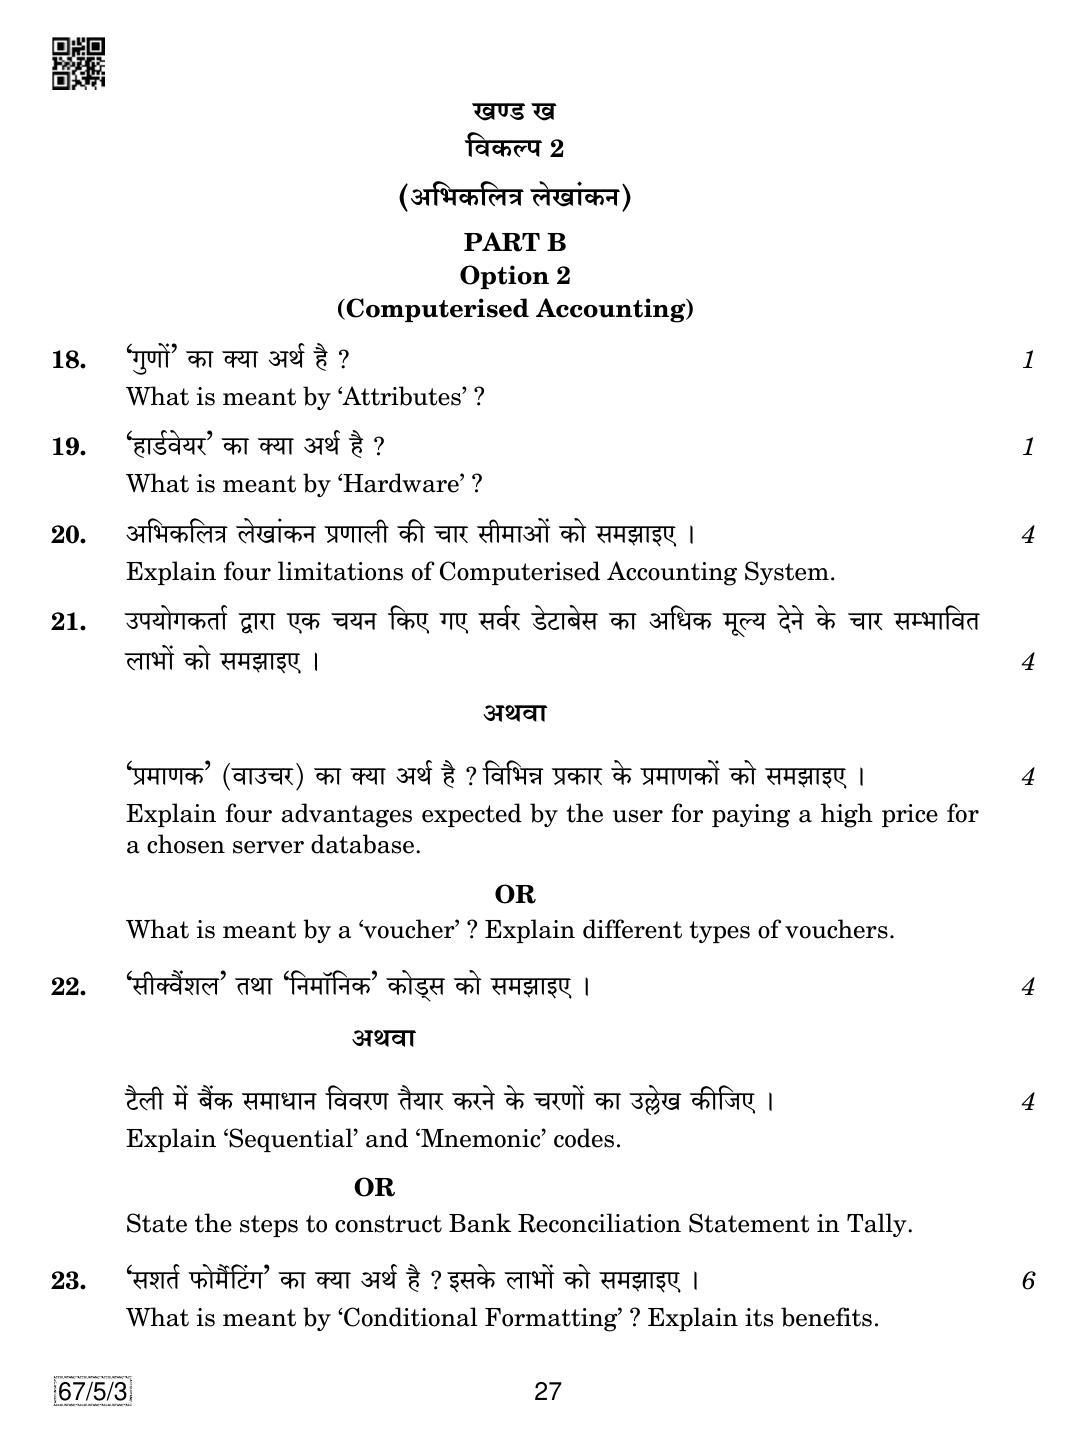 CBSE Class 12 67-5-3 Accountancy 2019 Question Paper - Page 27